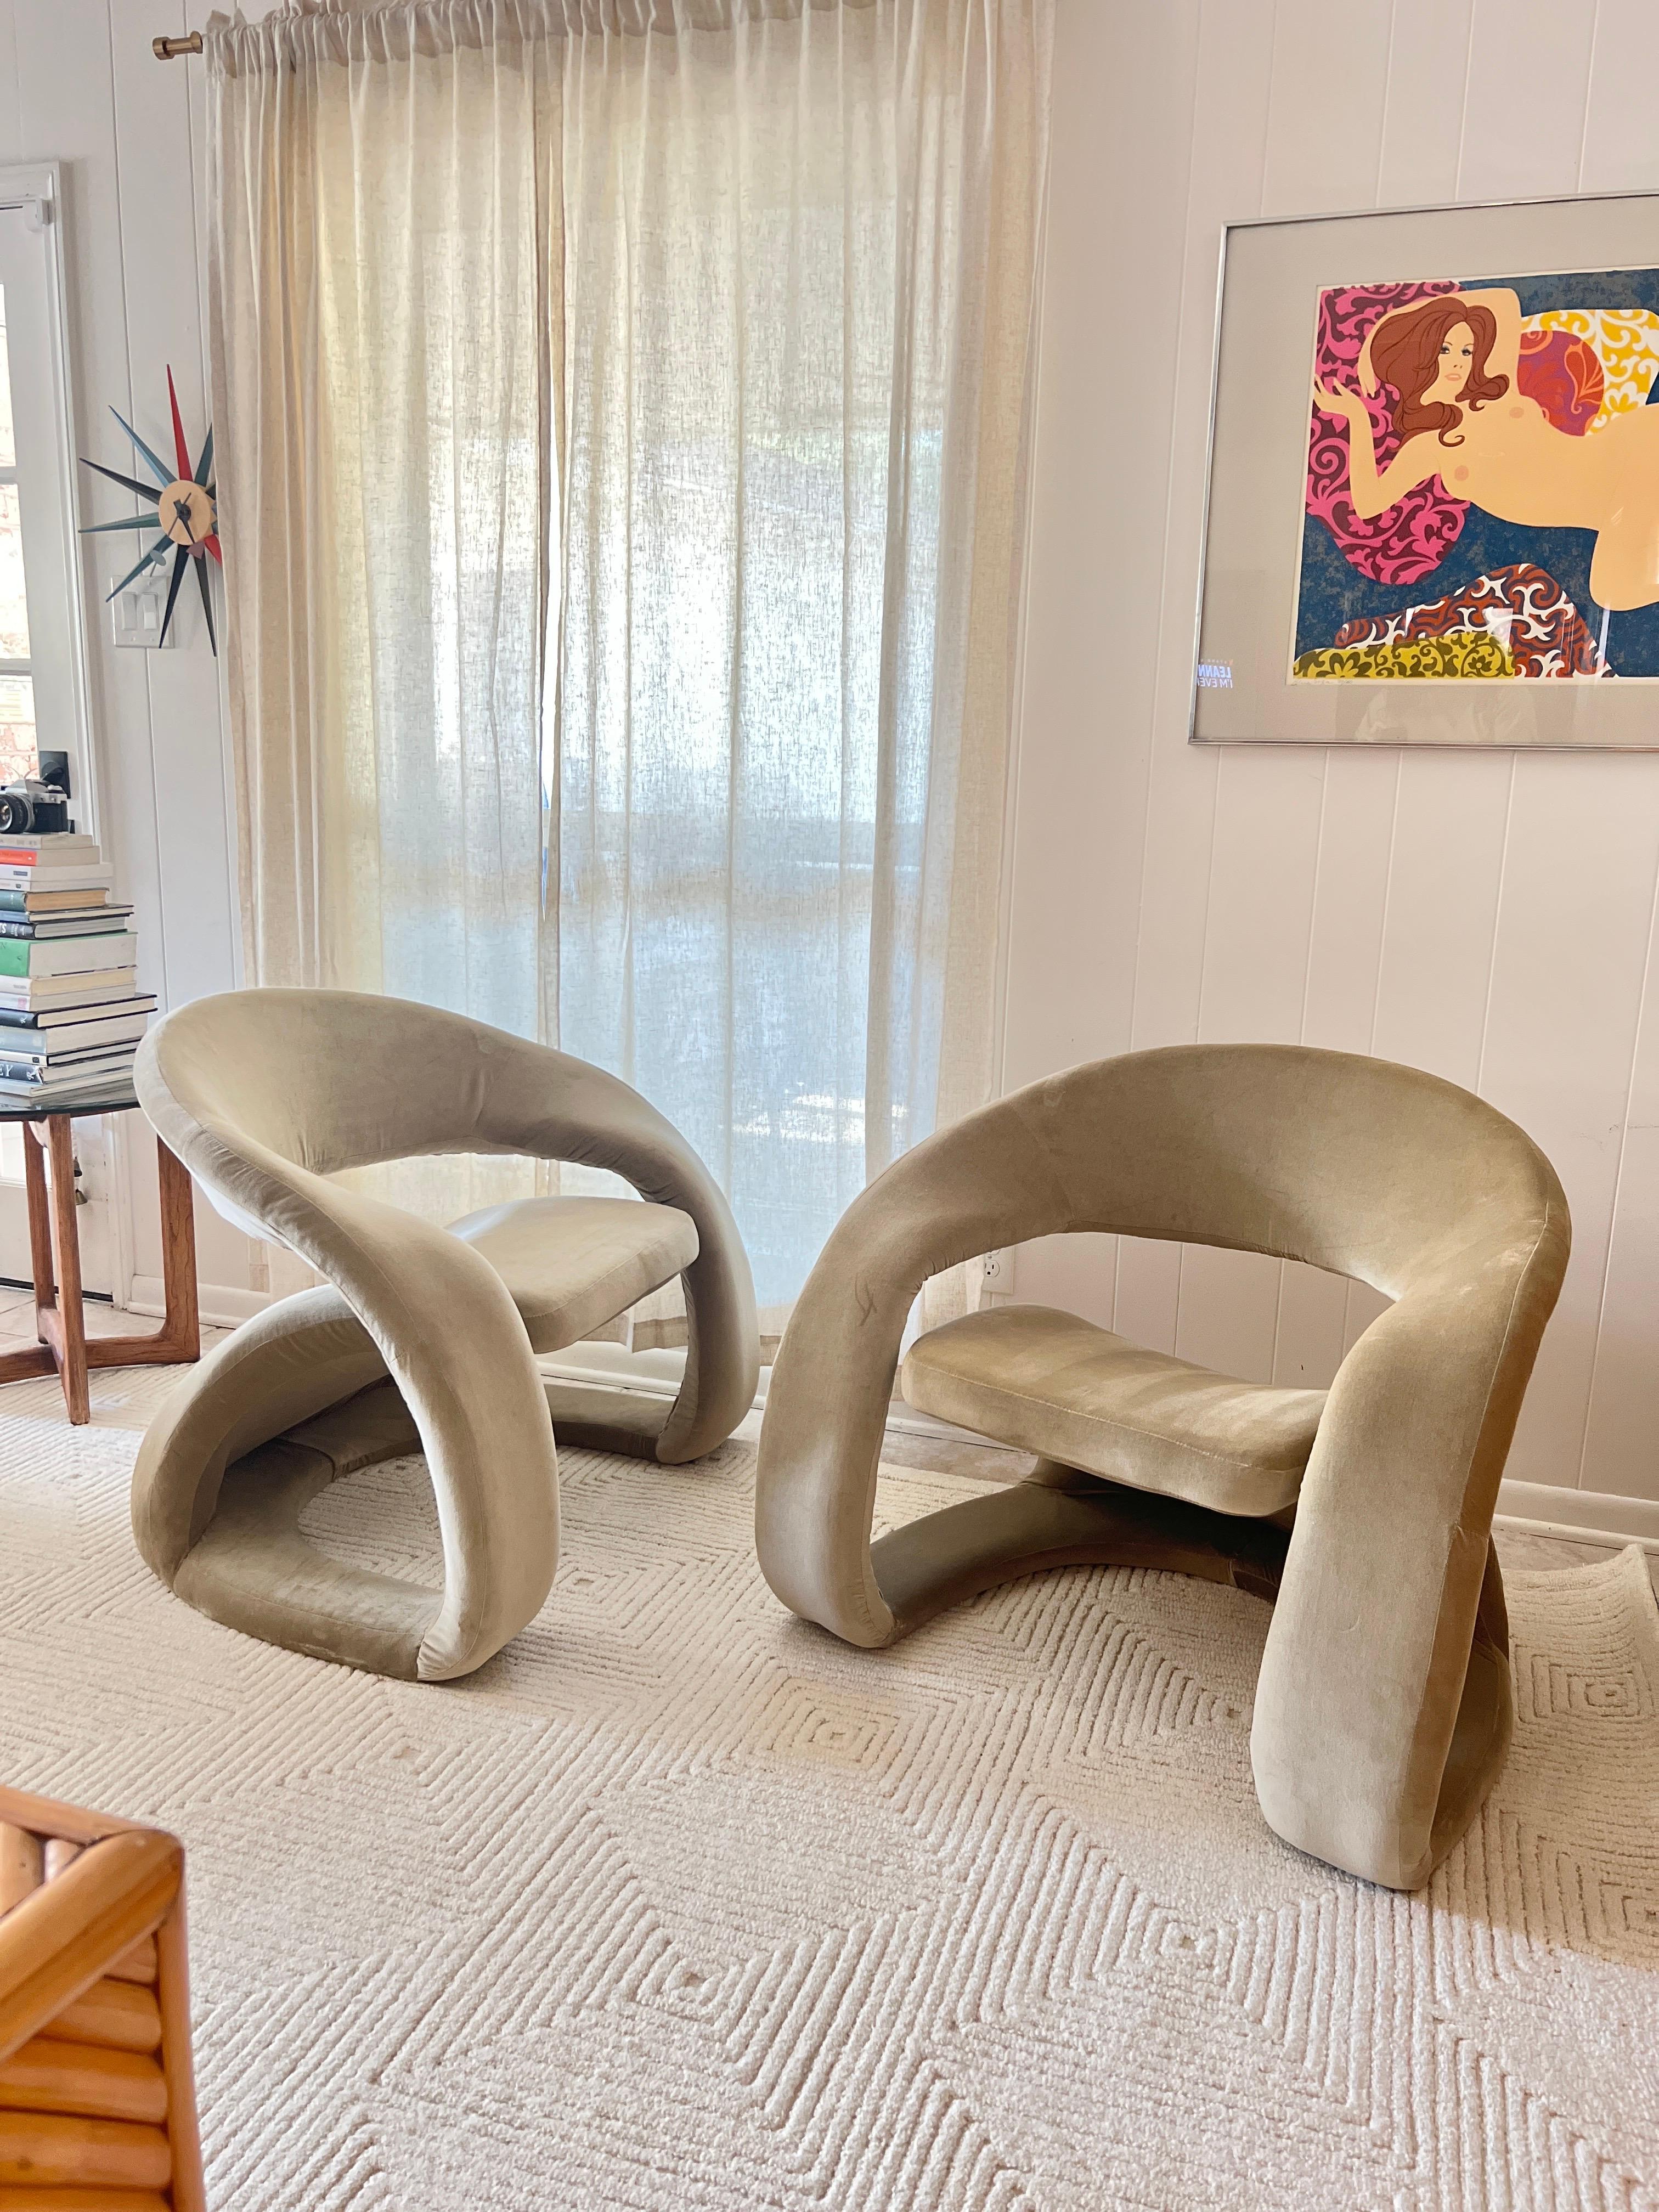 Velvet A pair of sculptural tongue chairs by Jaymar, circa 1980s. In sage green velvet